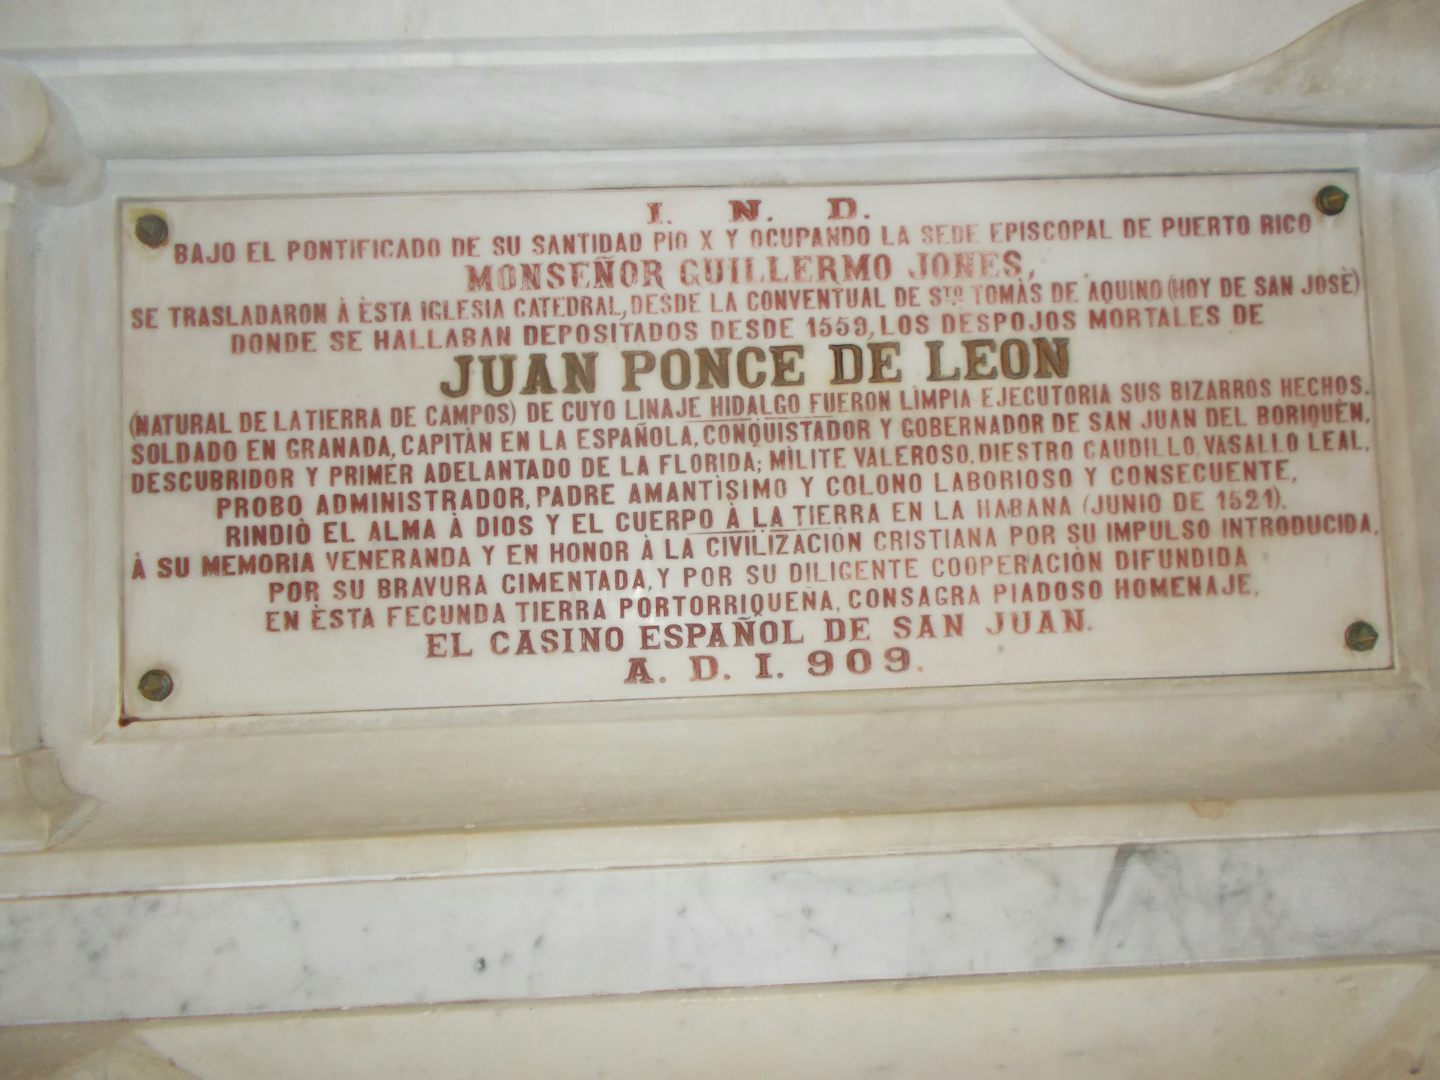 Puerto Rico. The tomb of Ponce de Leon (fountain of youth guy) in the 2nd o